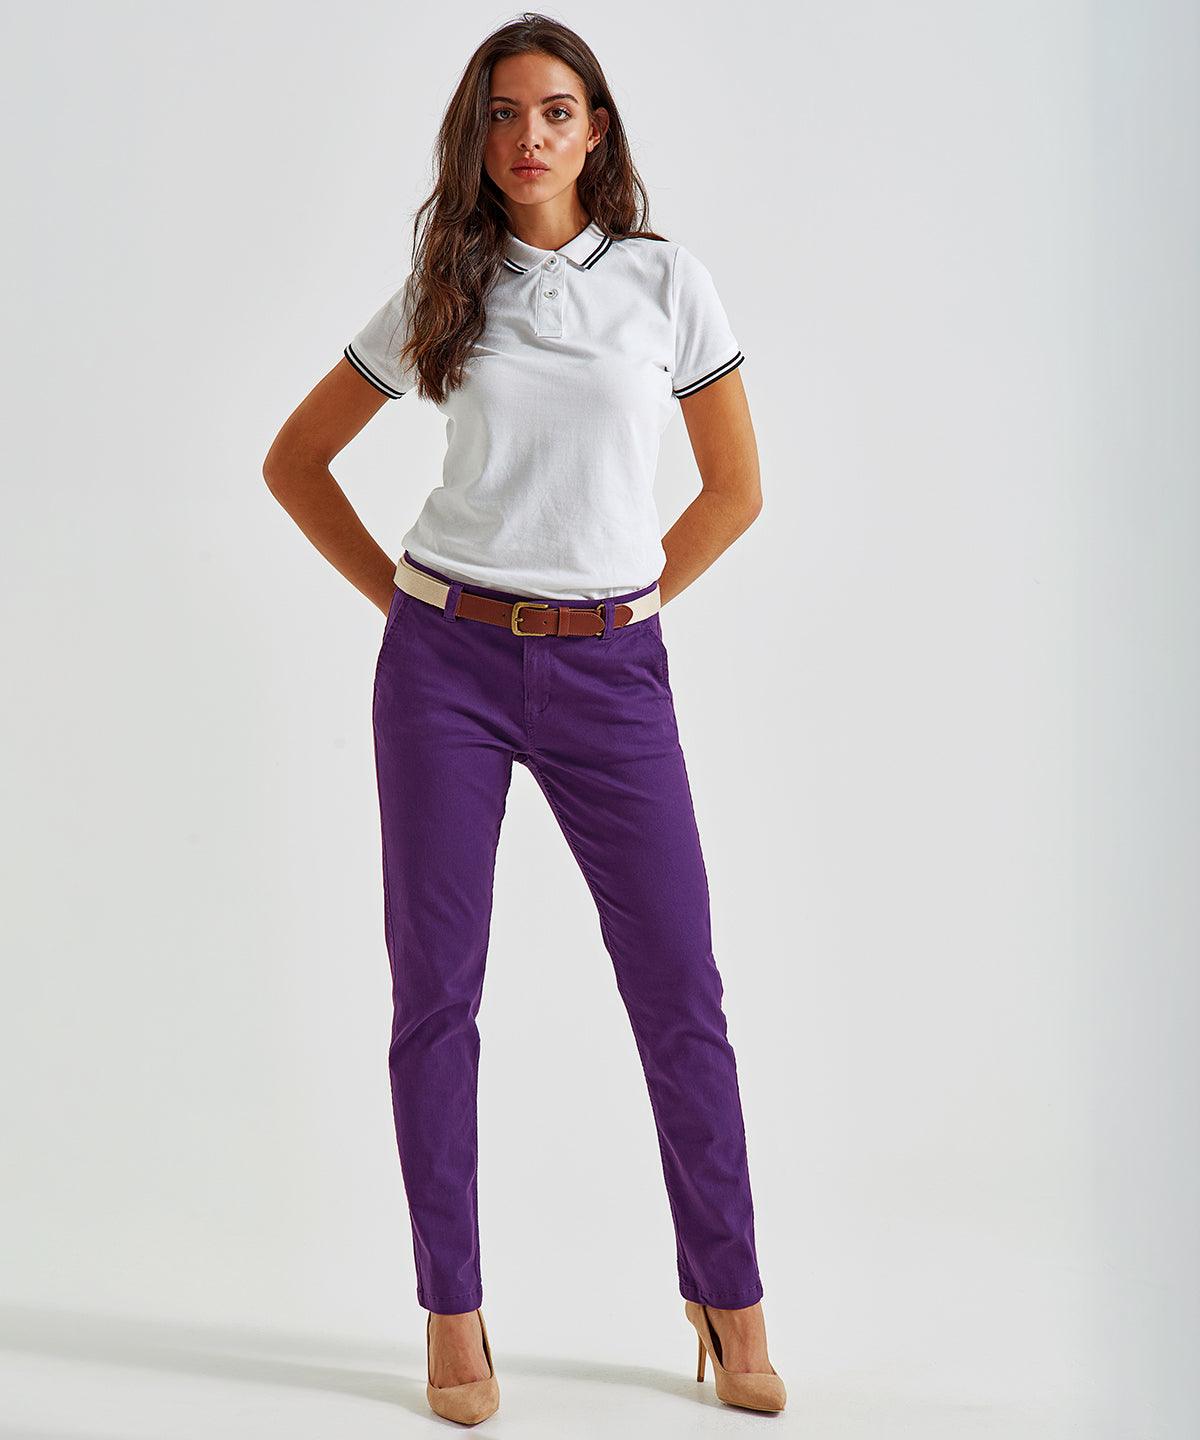 Pink Carnation - Women's chinos Trousers Asquith & Fox Must Haves, Raladeal - Recently Added, Tailoring, Trousers & Shorts, Women's Fashion Schoolwear Centres